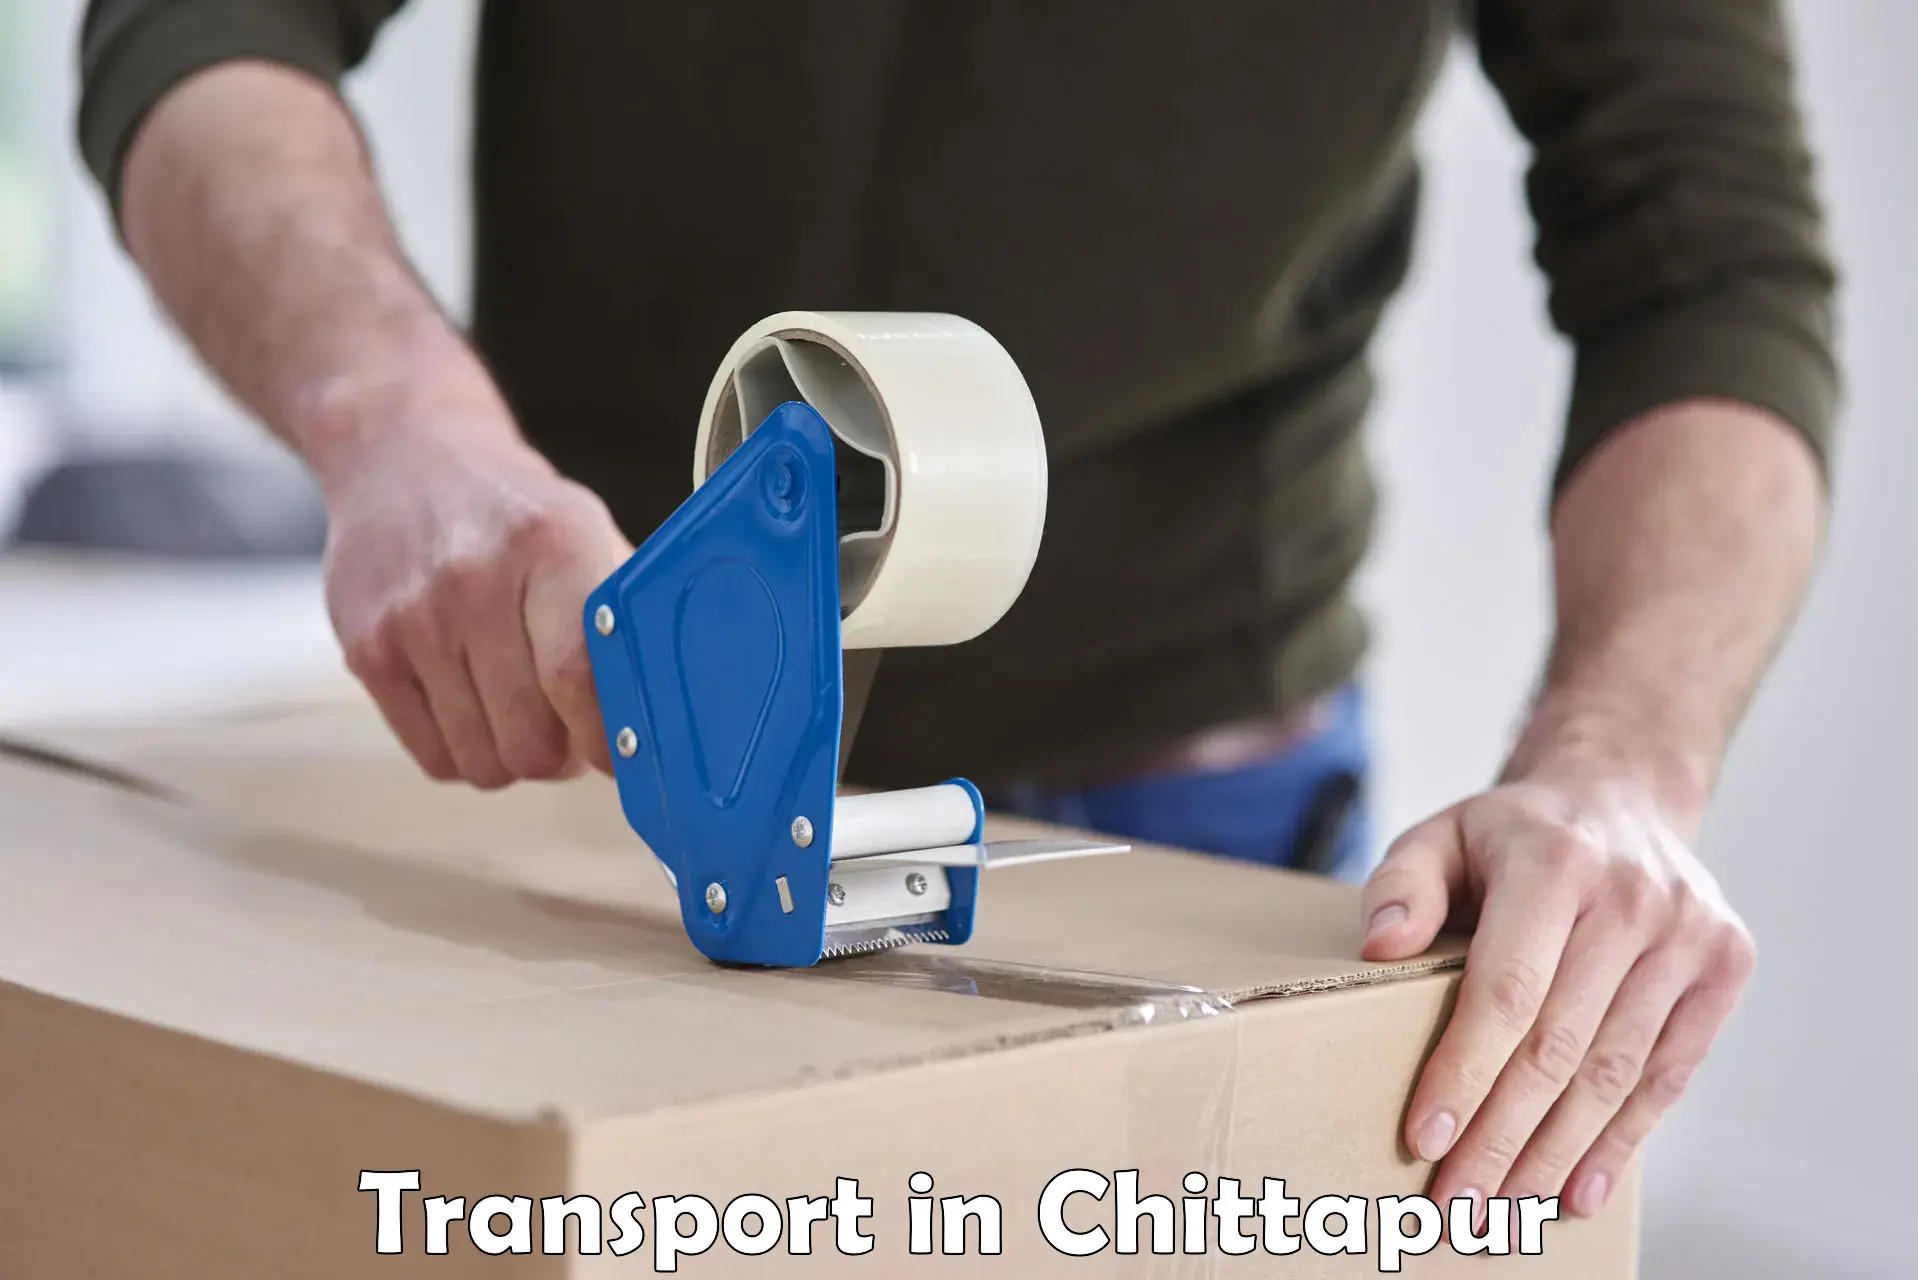 Pick up transport service in Chittapur